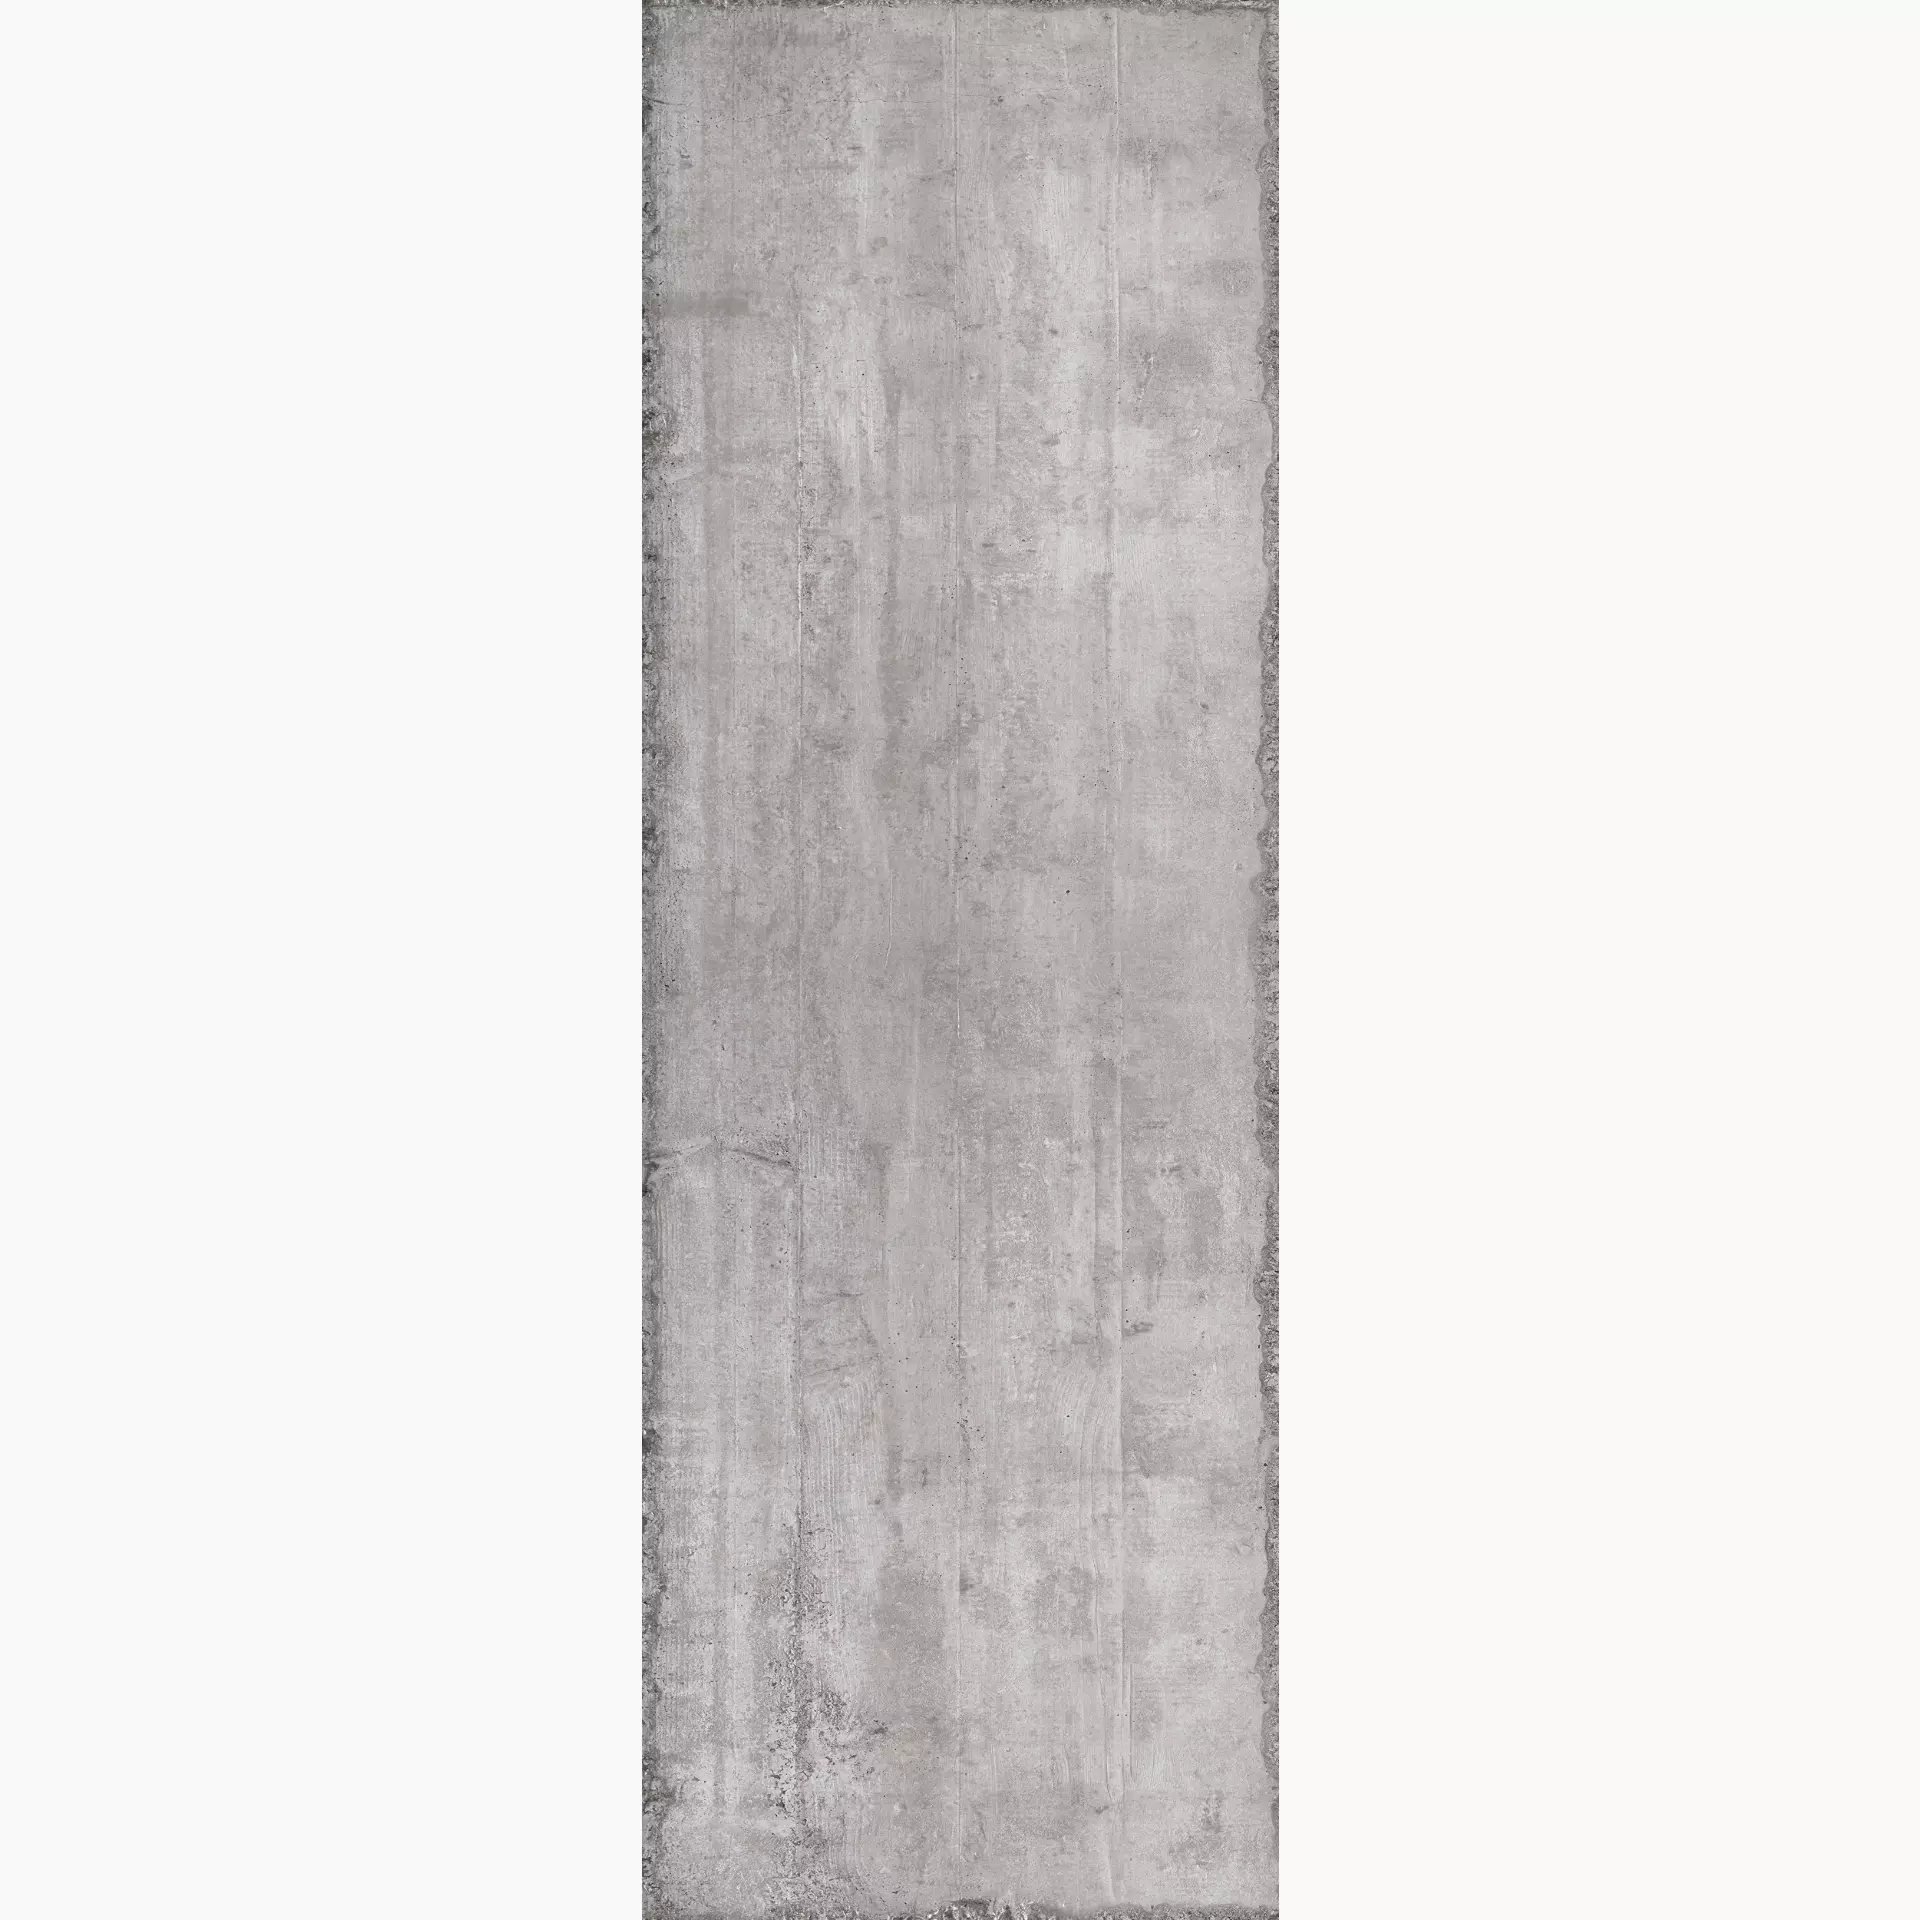 Sant Agostino Form Grey Natural CSAFORGR60 60x180cm rectified 10mm